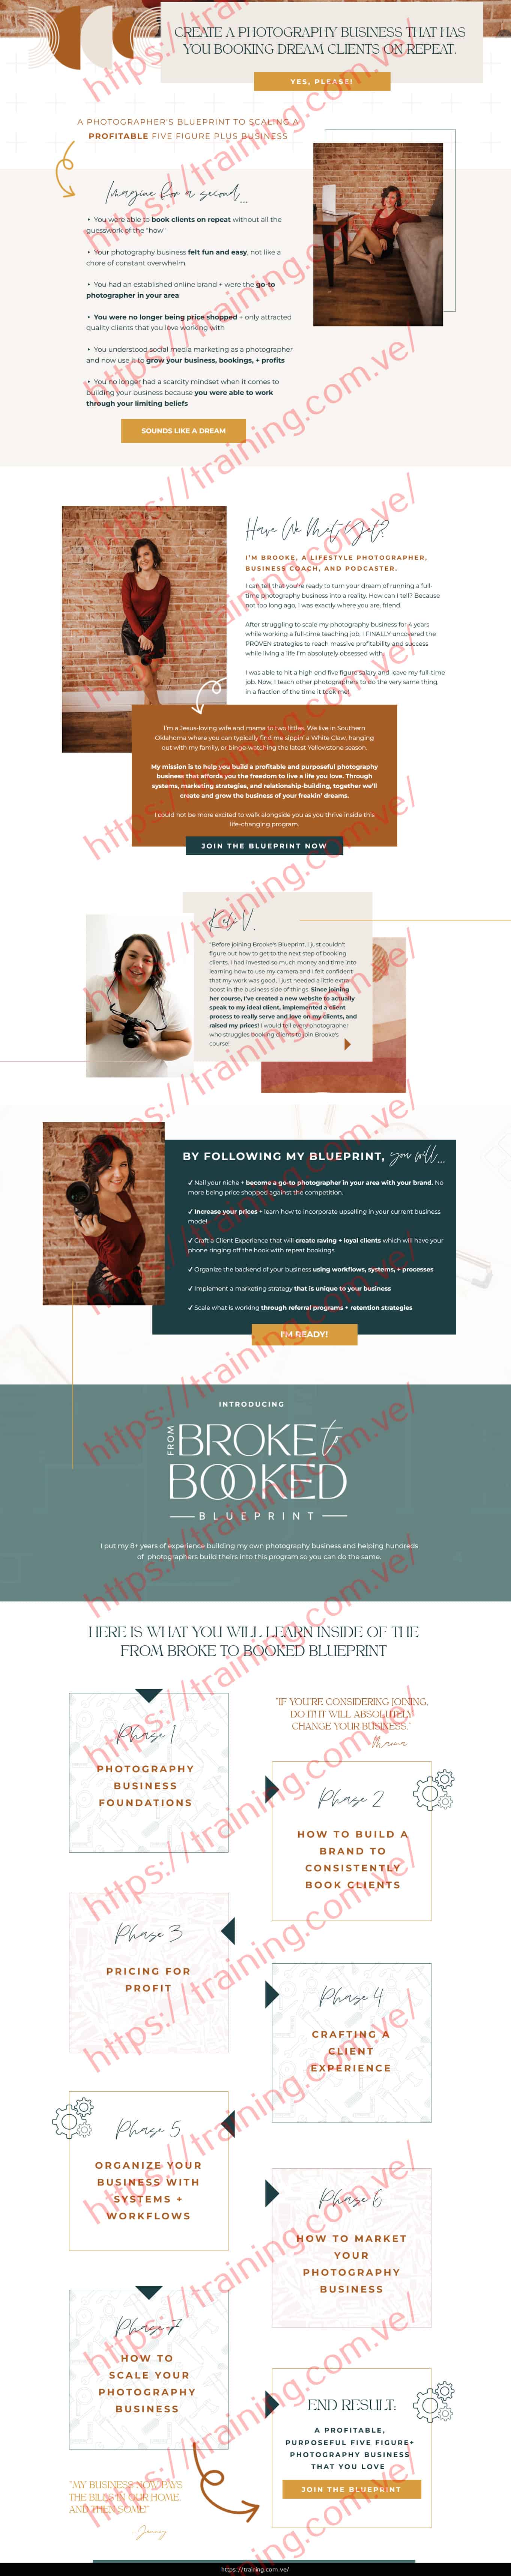 From Broke to Booked Blueprint Program 2.0 by Brooke Jefferson Sales Page